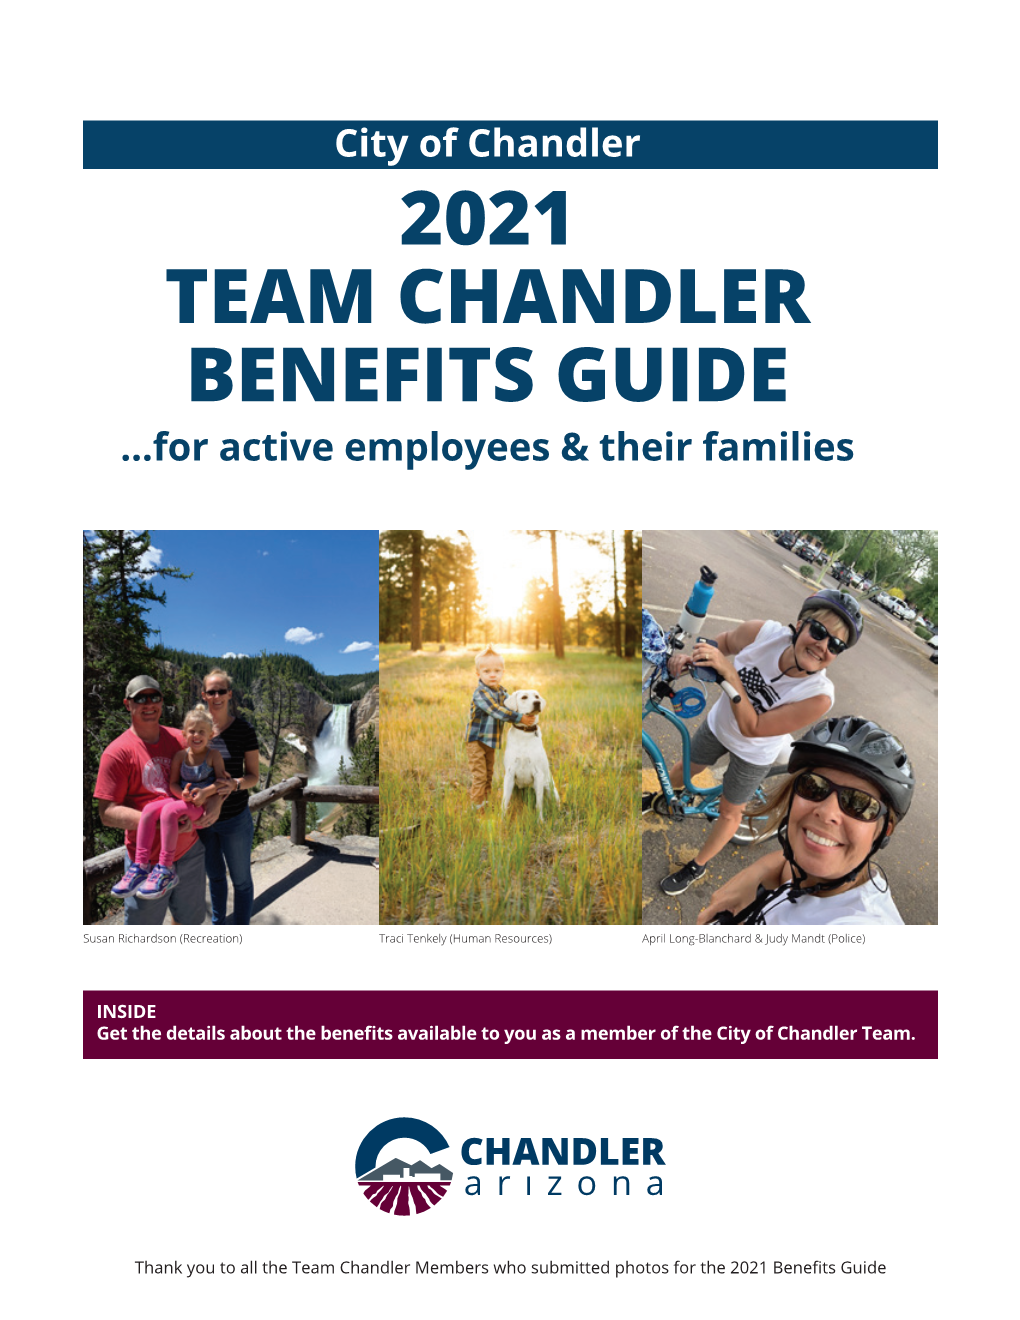 2021 City of Chandler Employee Benefits Guide